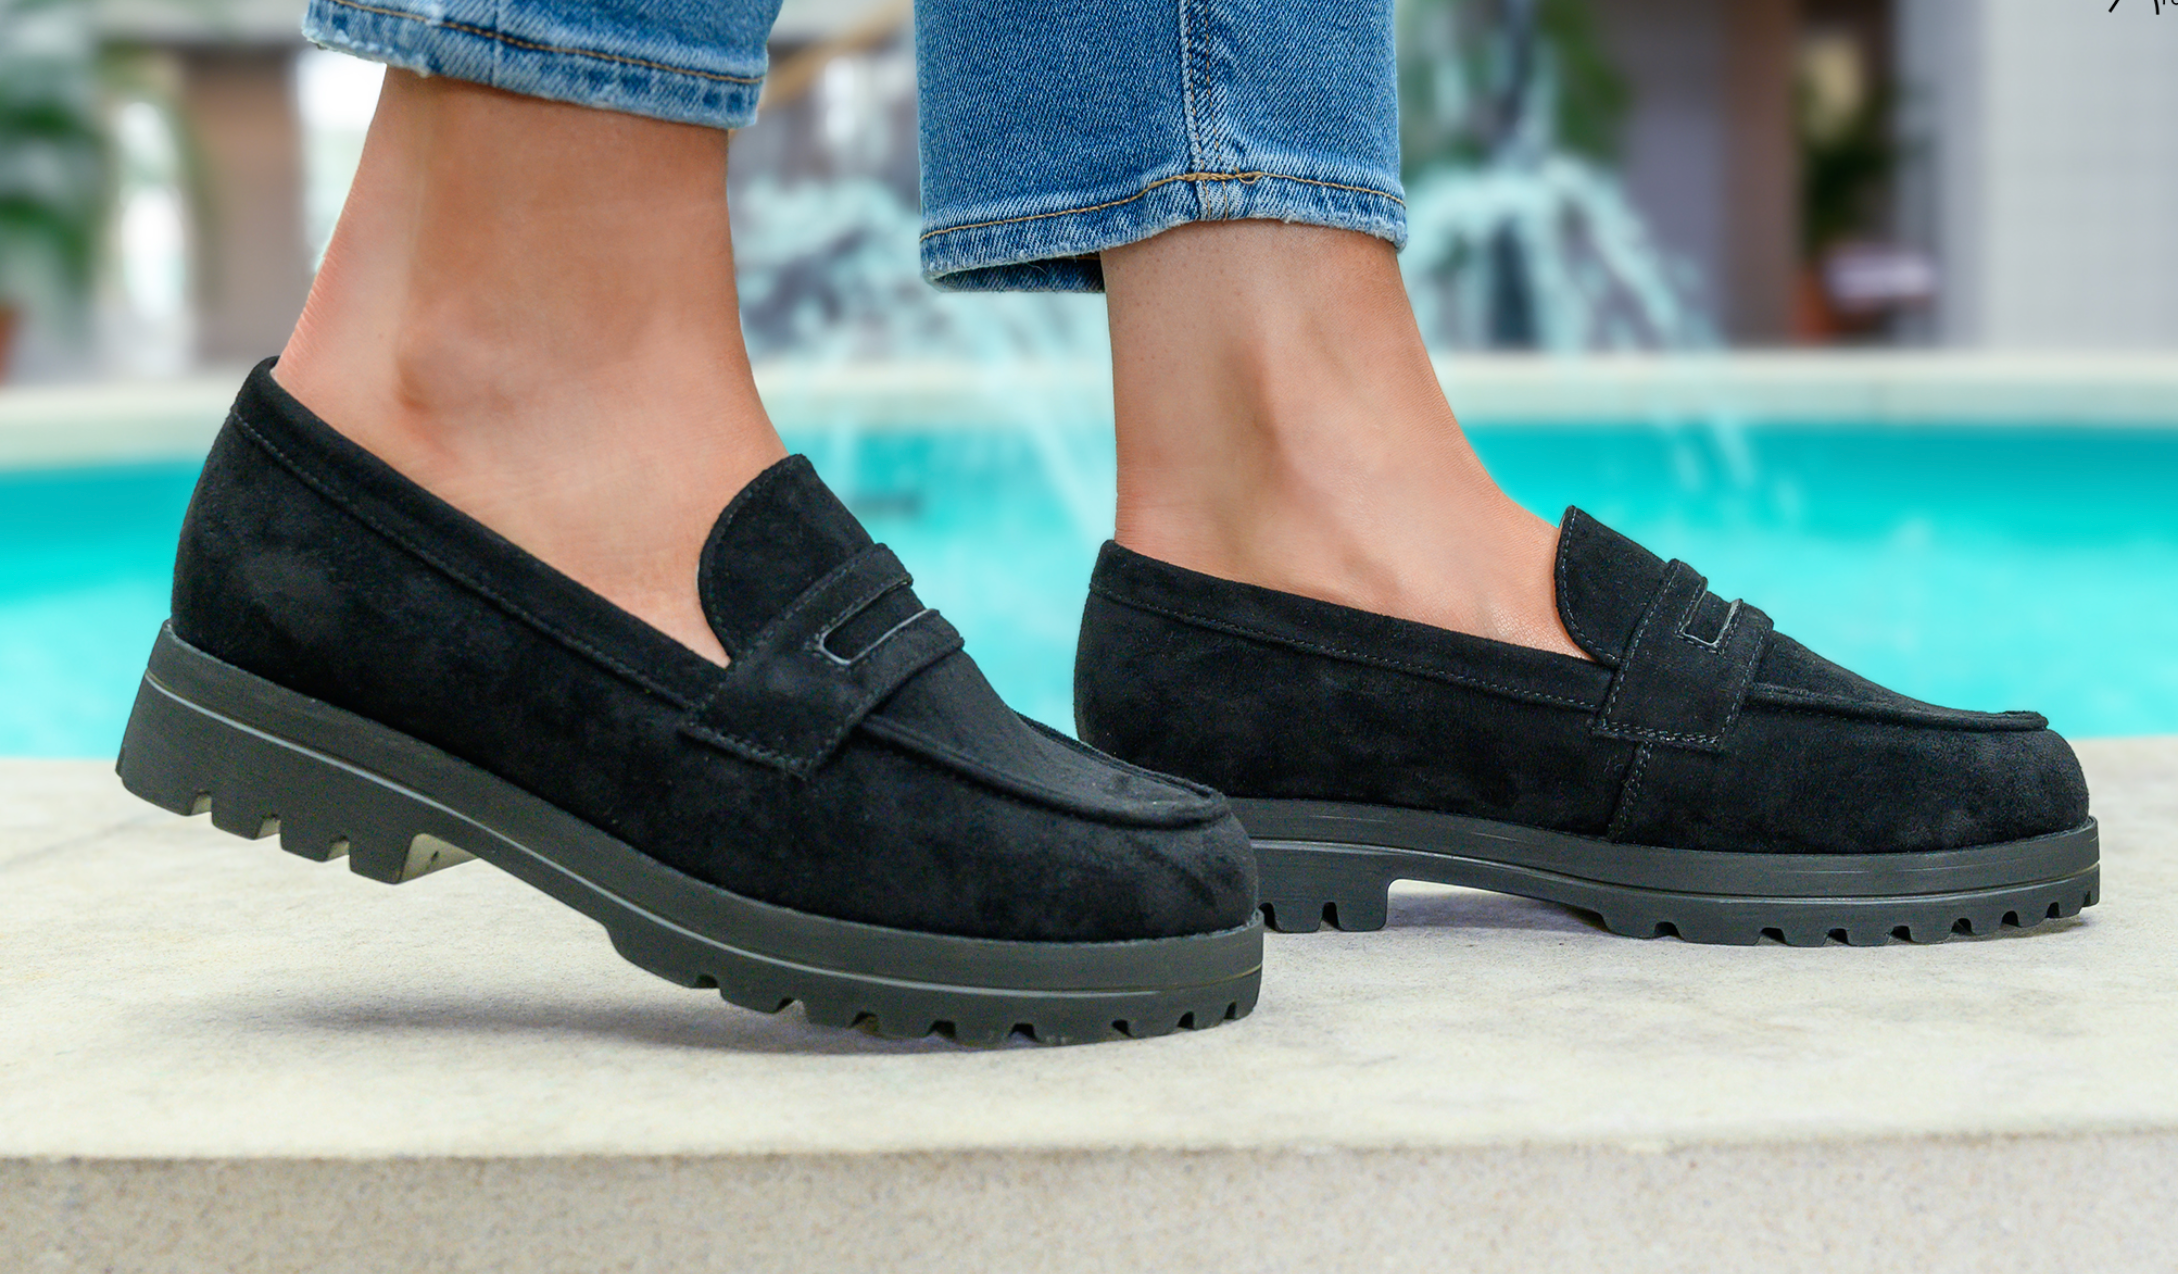 INSPO LOAFERS By Corky's (2 Colors)